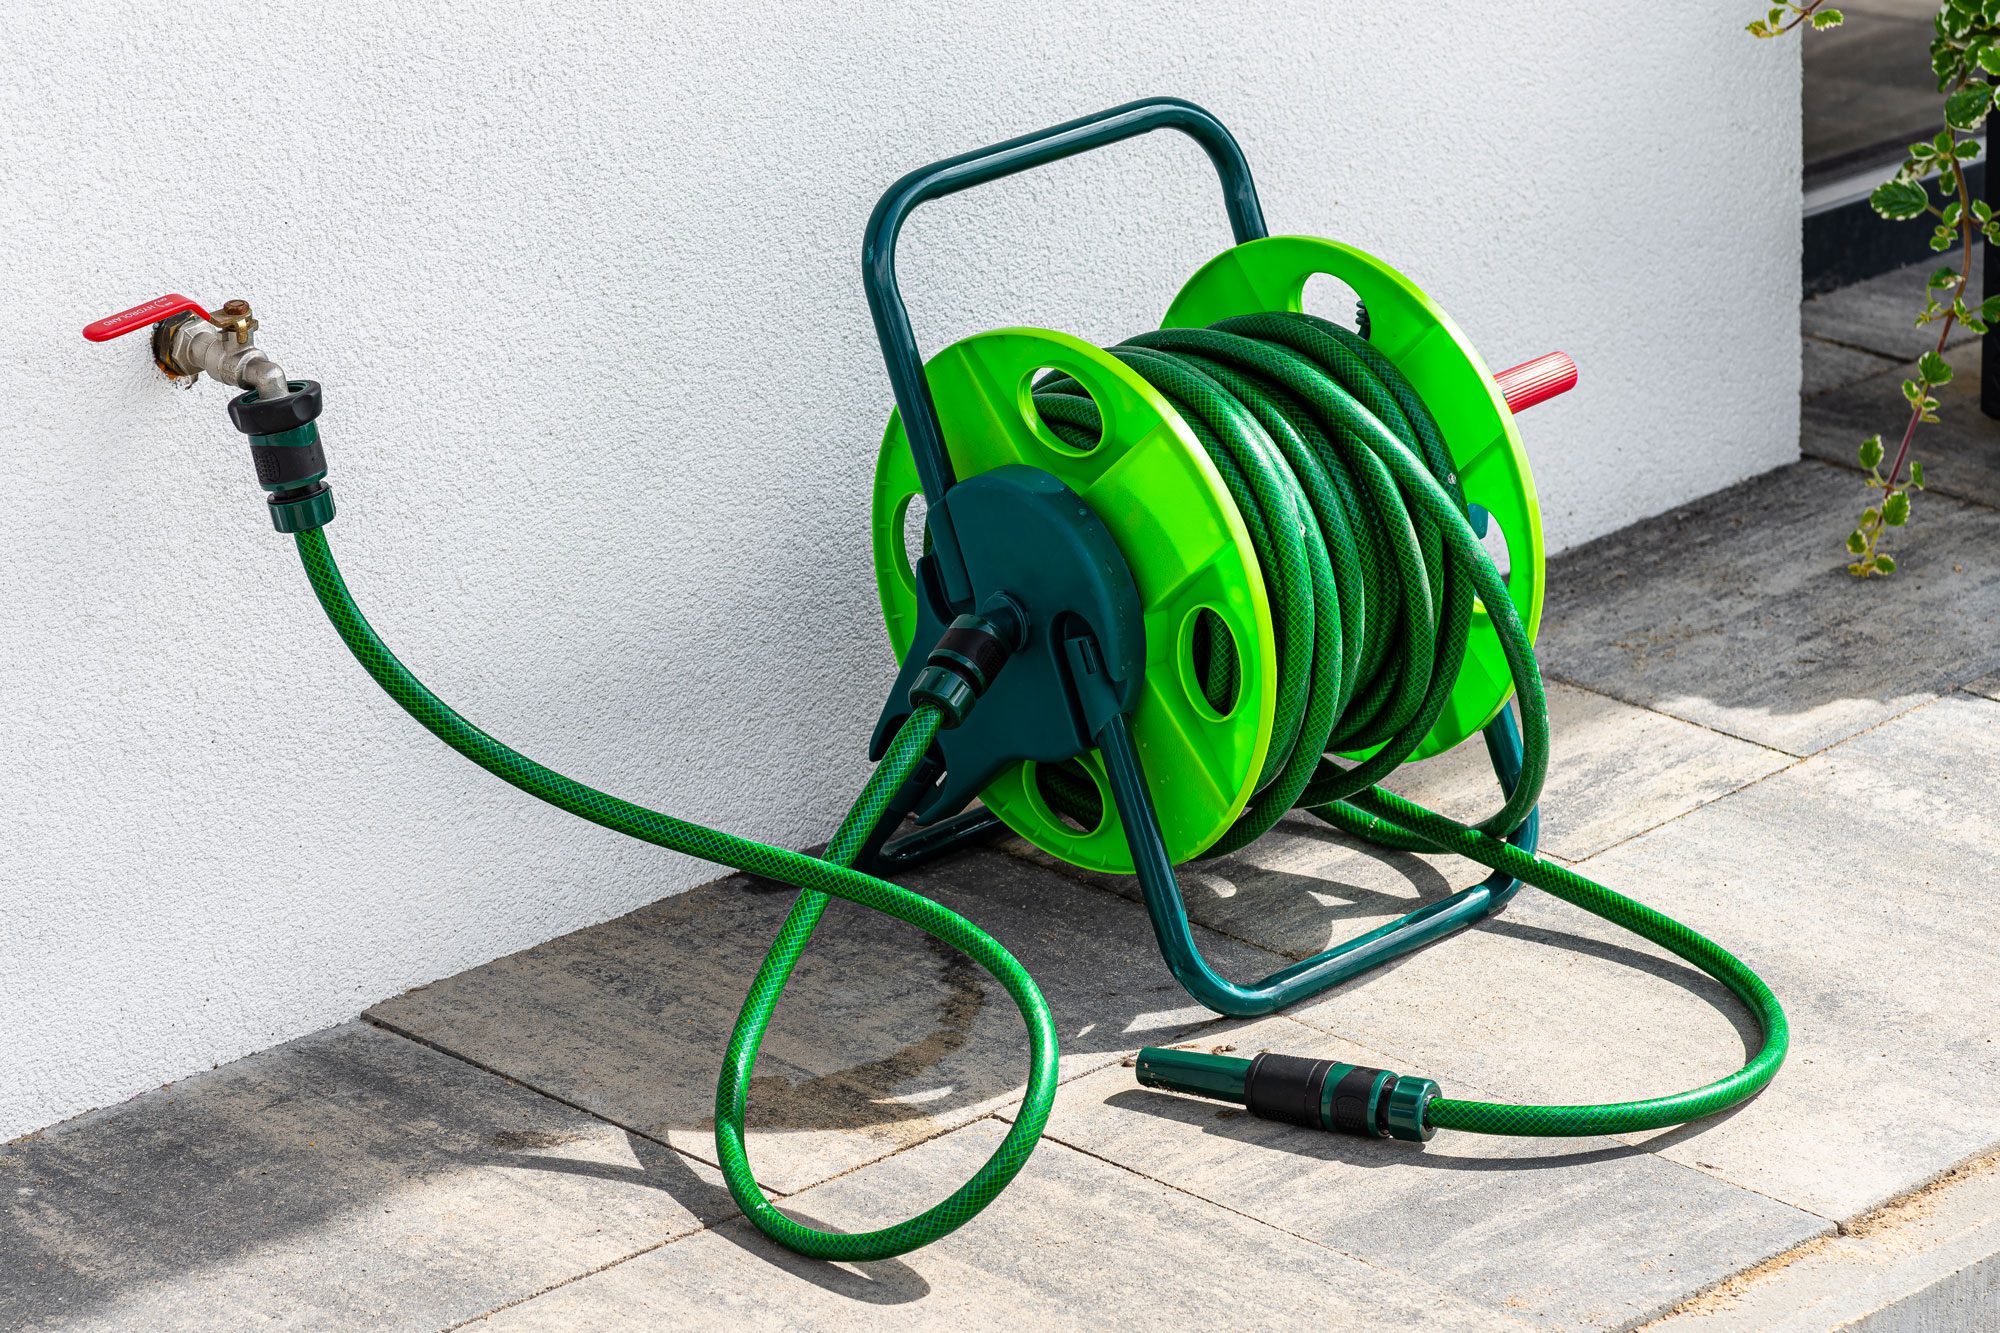 A Garden Hose Connected To A Faucet Protruding From A Building Against A White Facade